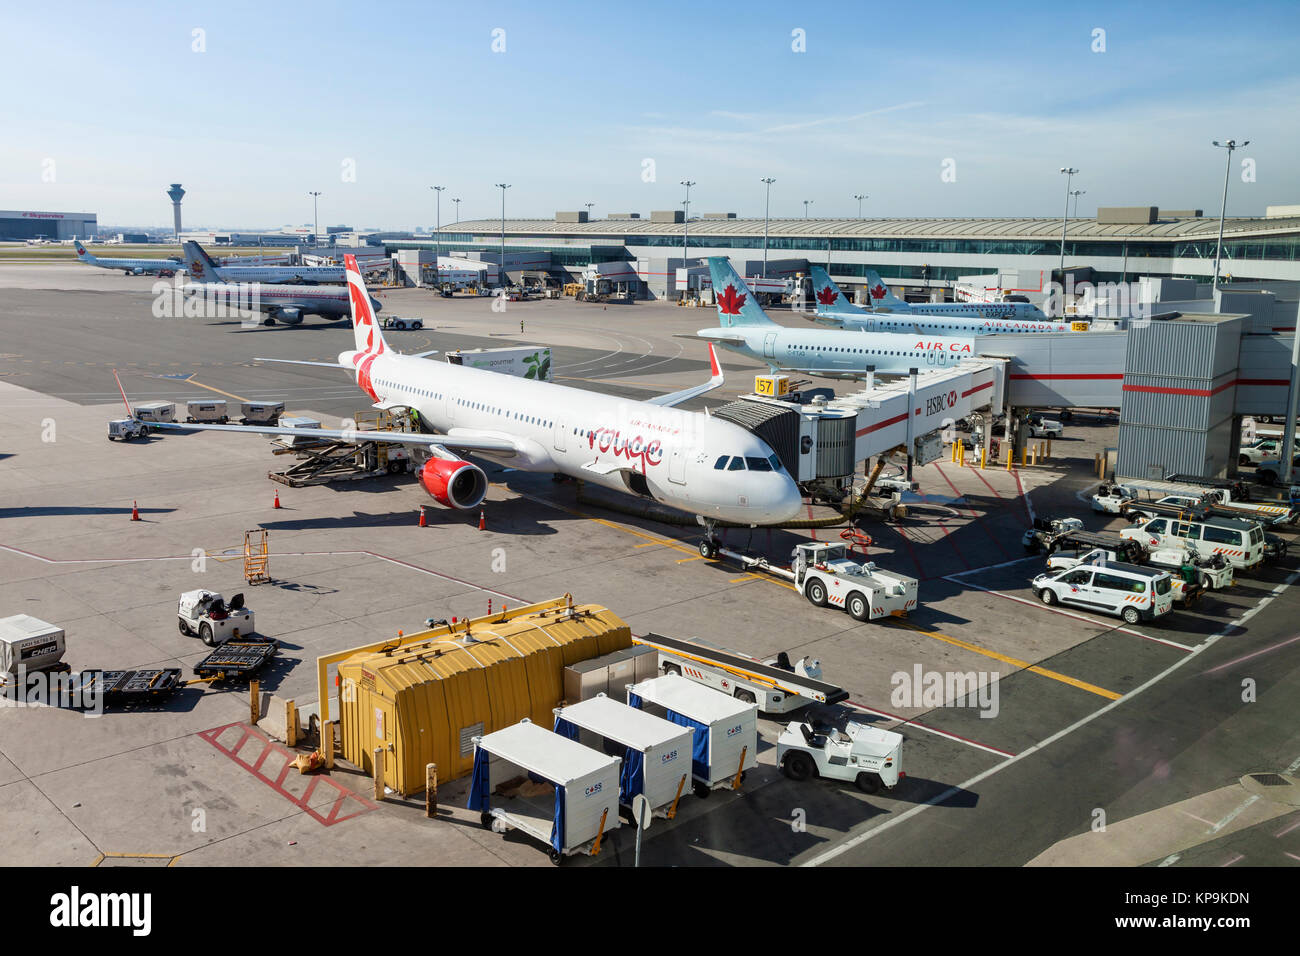 Toronto, Canada - Oct 22, 2017: Air Canada and rouge airplanes at the Toronto Pearson International Airport, Canada Stock Photo